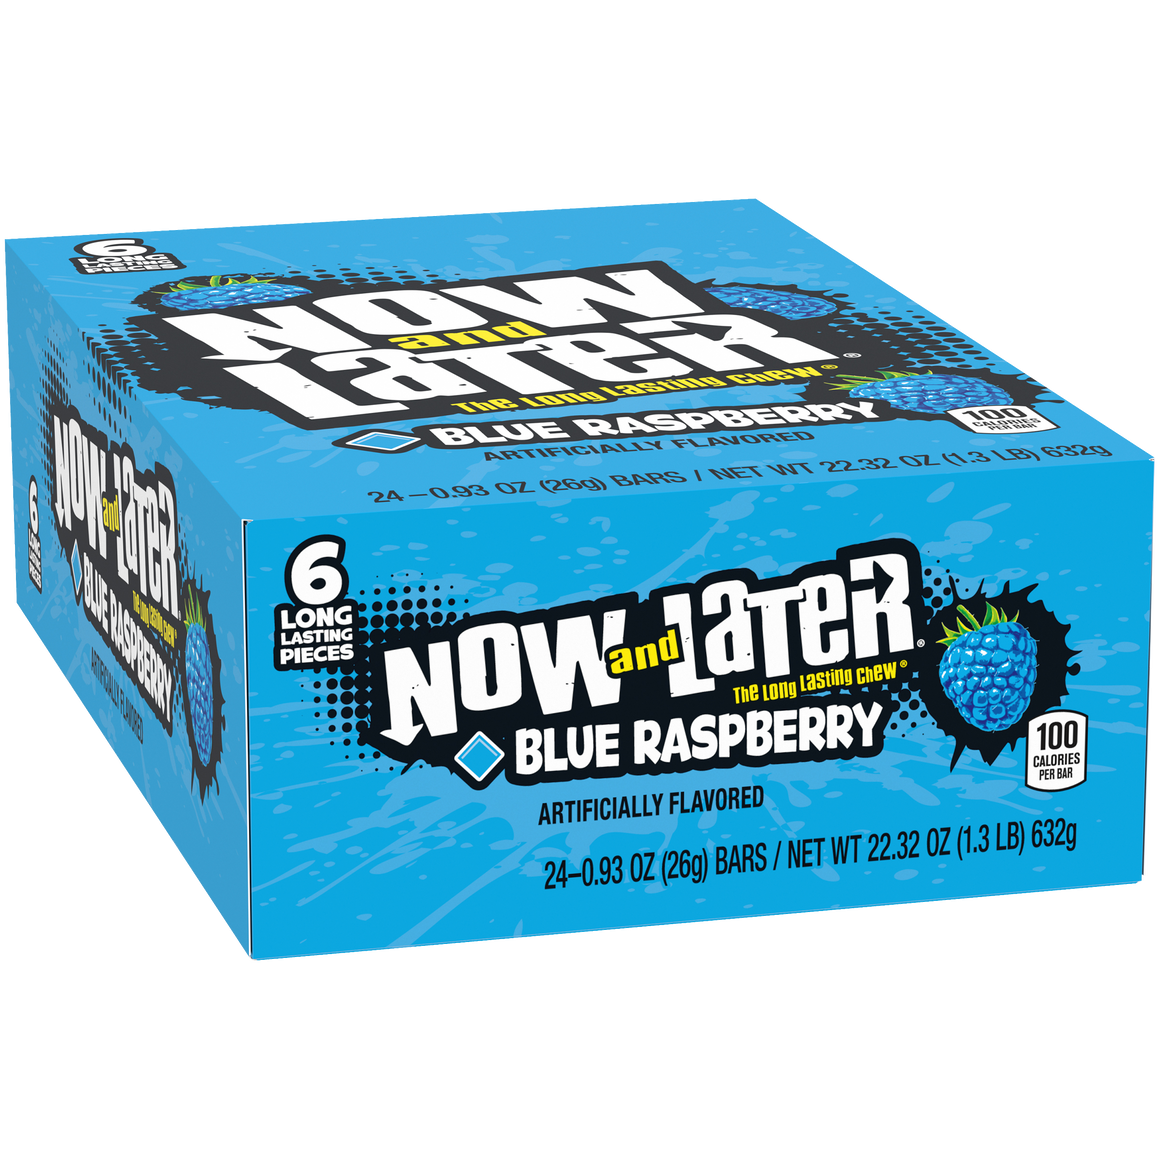 All City Candy Now and Later Blue Raspberry Candy 6-Pack Case of 24 Taffy Ferrara Candy Company For fresh candy and great service, visit www.allcitycandy.com